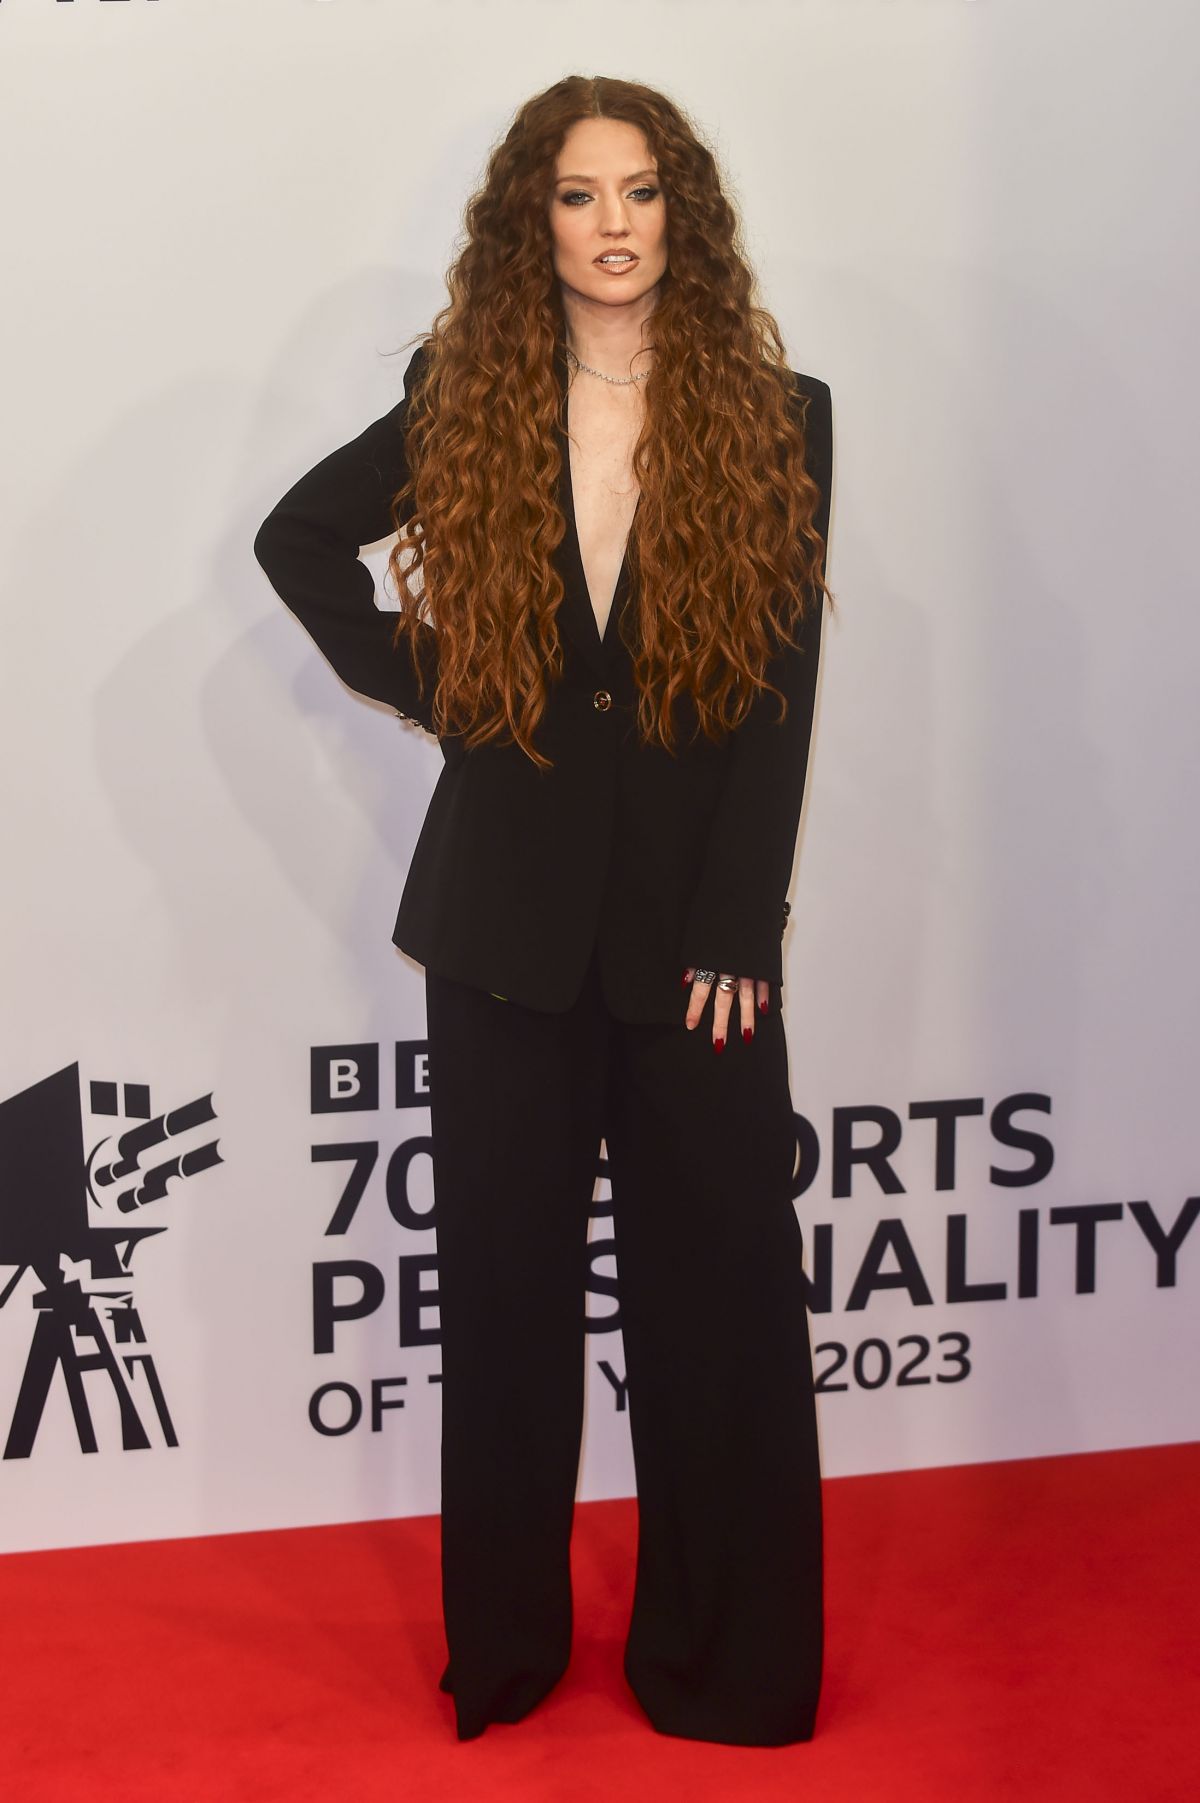 Person with long curly hair standing on a red carpet.